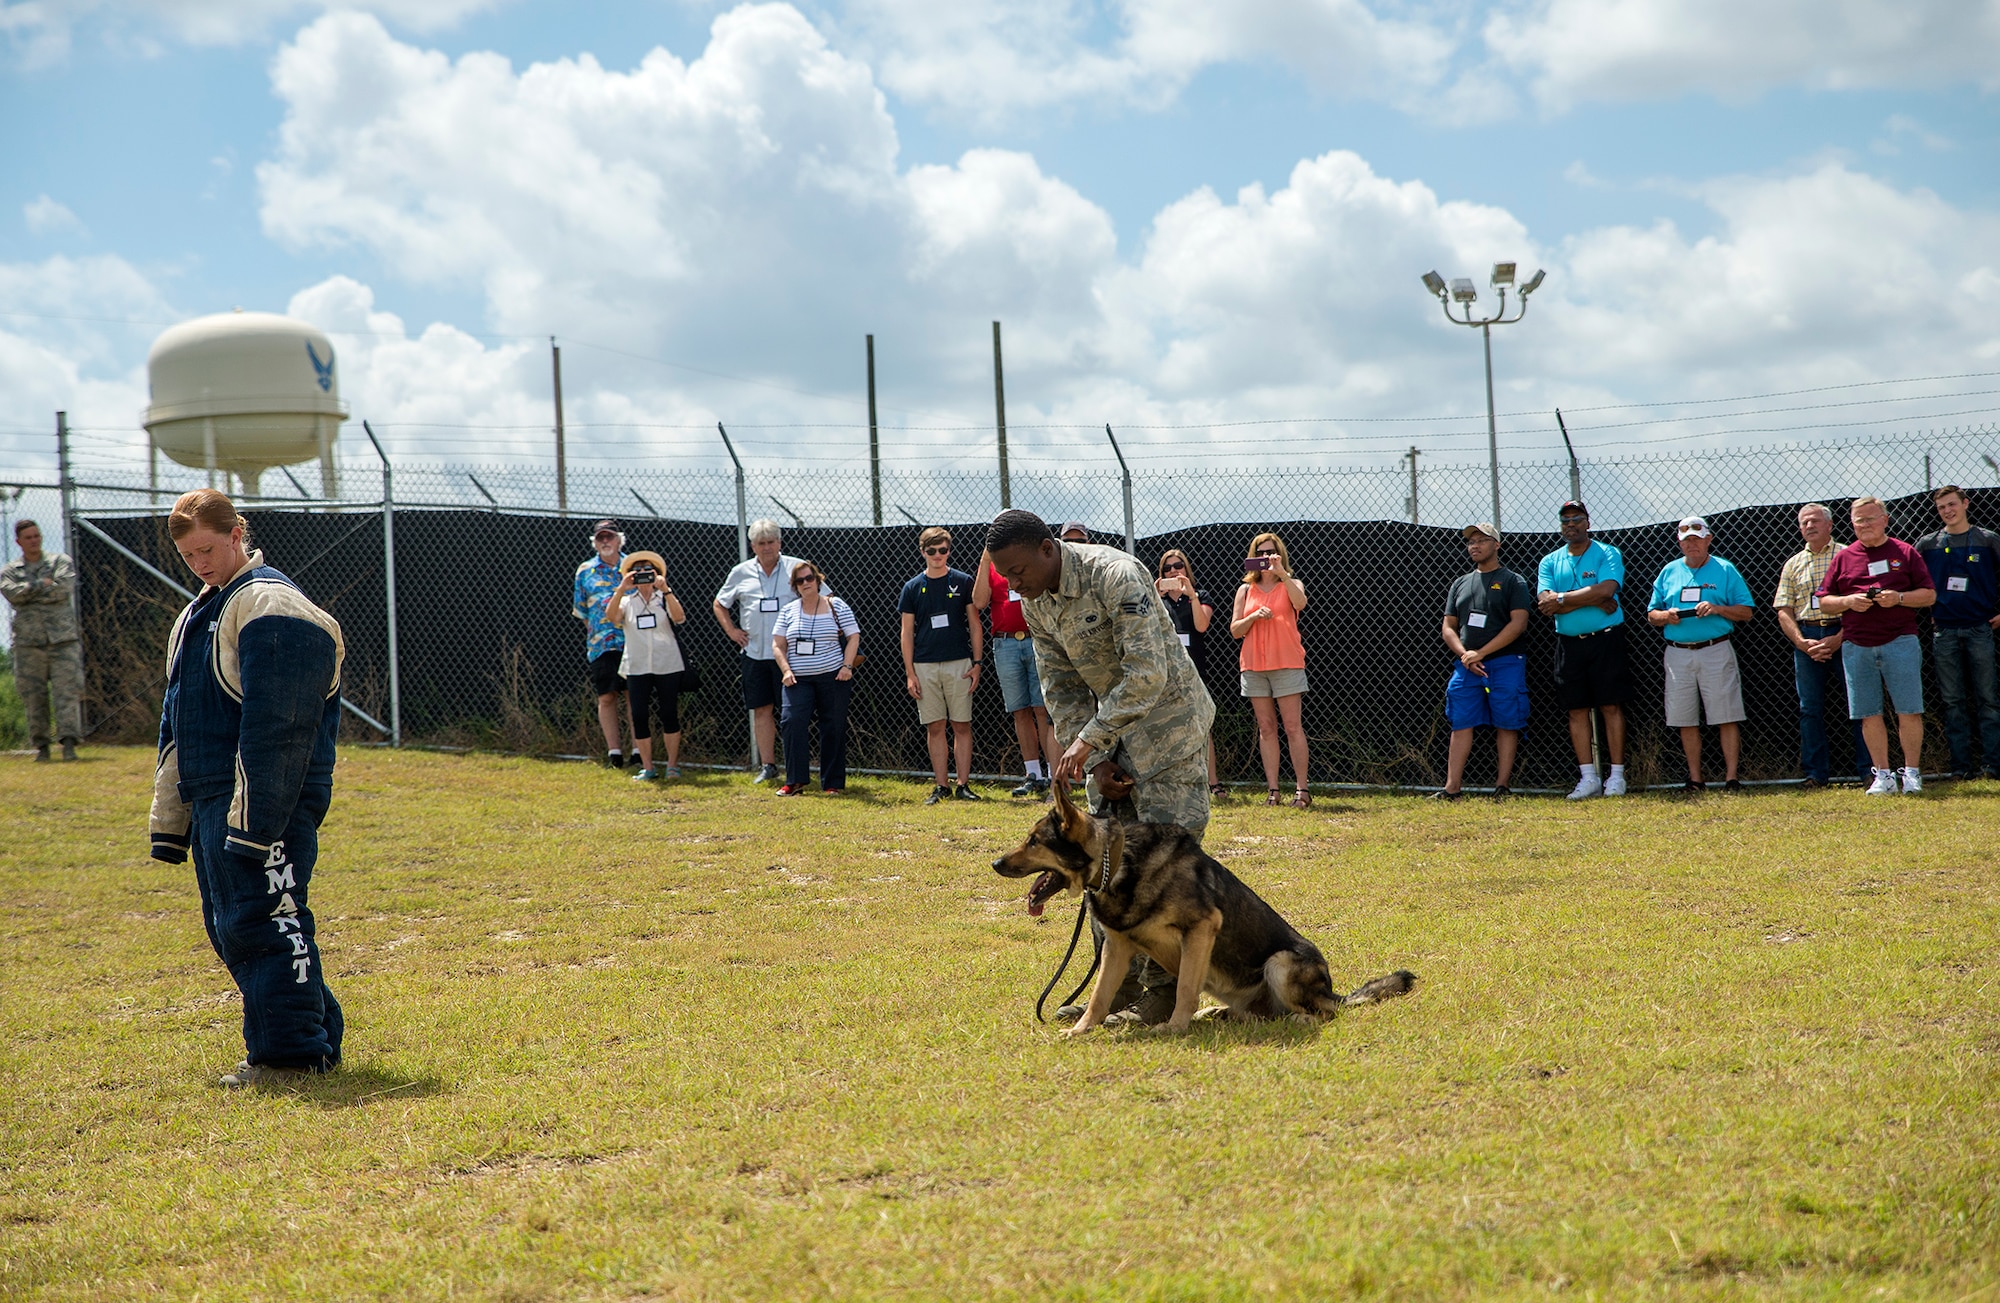 Senior Airmen Sarah Banks and Travis Waddy, 802nd Security Forces Squadron K-9 handler, perform a controlled agression demonstration for members of the National Corvette Restorers Society July 13, 2017 at Joint Base San Antonio-Lackland, Texas. The visit also included tours of a C-5M Super Galaxy aircraft and United States Air Force Airman Heritage Museum and Enlisted Character Development Center. (U.S. Air Force photo by Benjamin Faske)